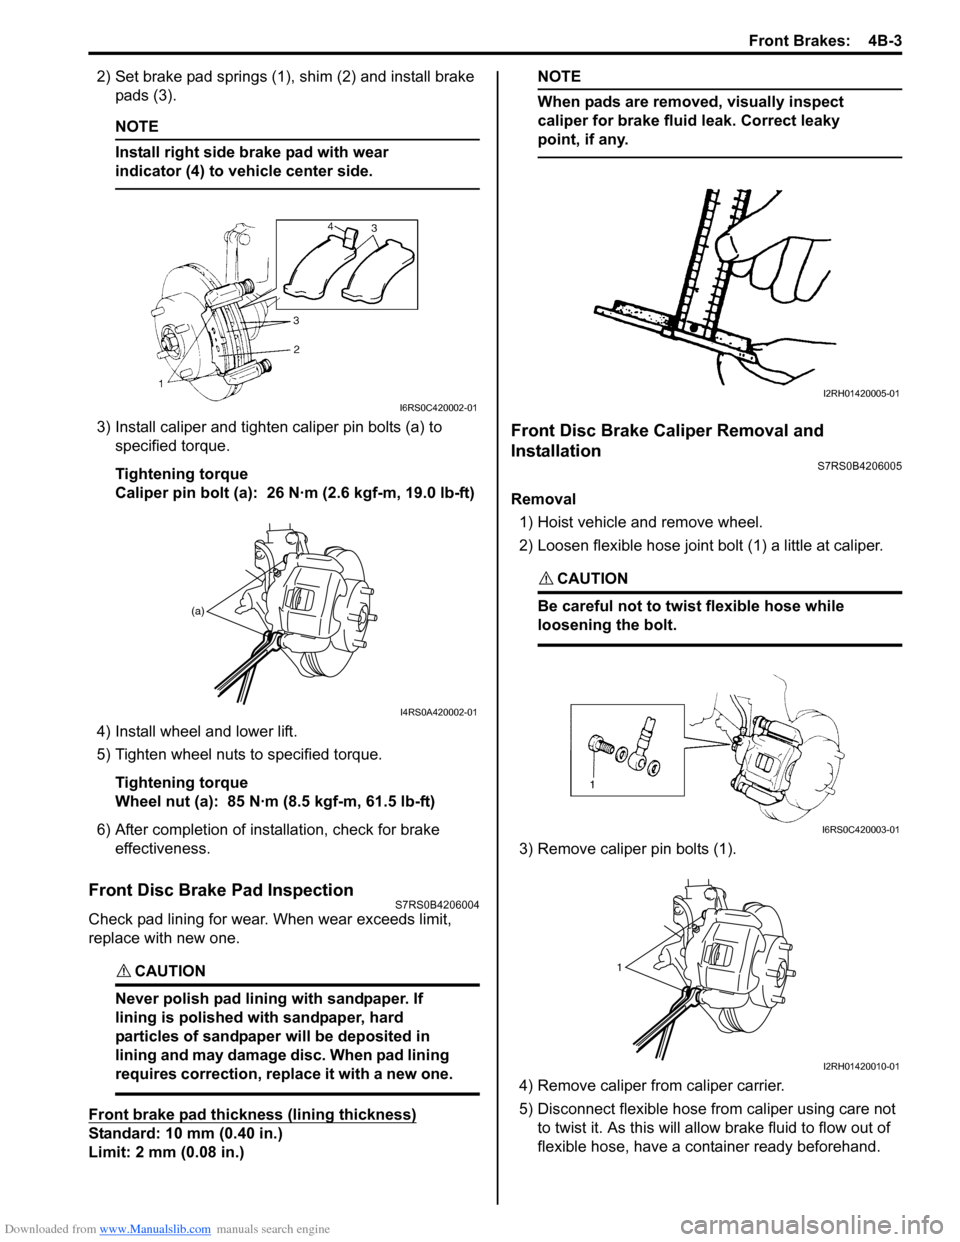 SUZUKI SWIFT 2008 2.G Service User Guide Downloaded from www.Manualslib.com manuals search engine Front Brakes:  4B-3
2) Set brake pad springs (1), shim (2) and install brake pads (3).
NOTE
Install right side brake pad with wear 
indicator (